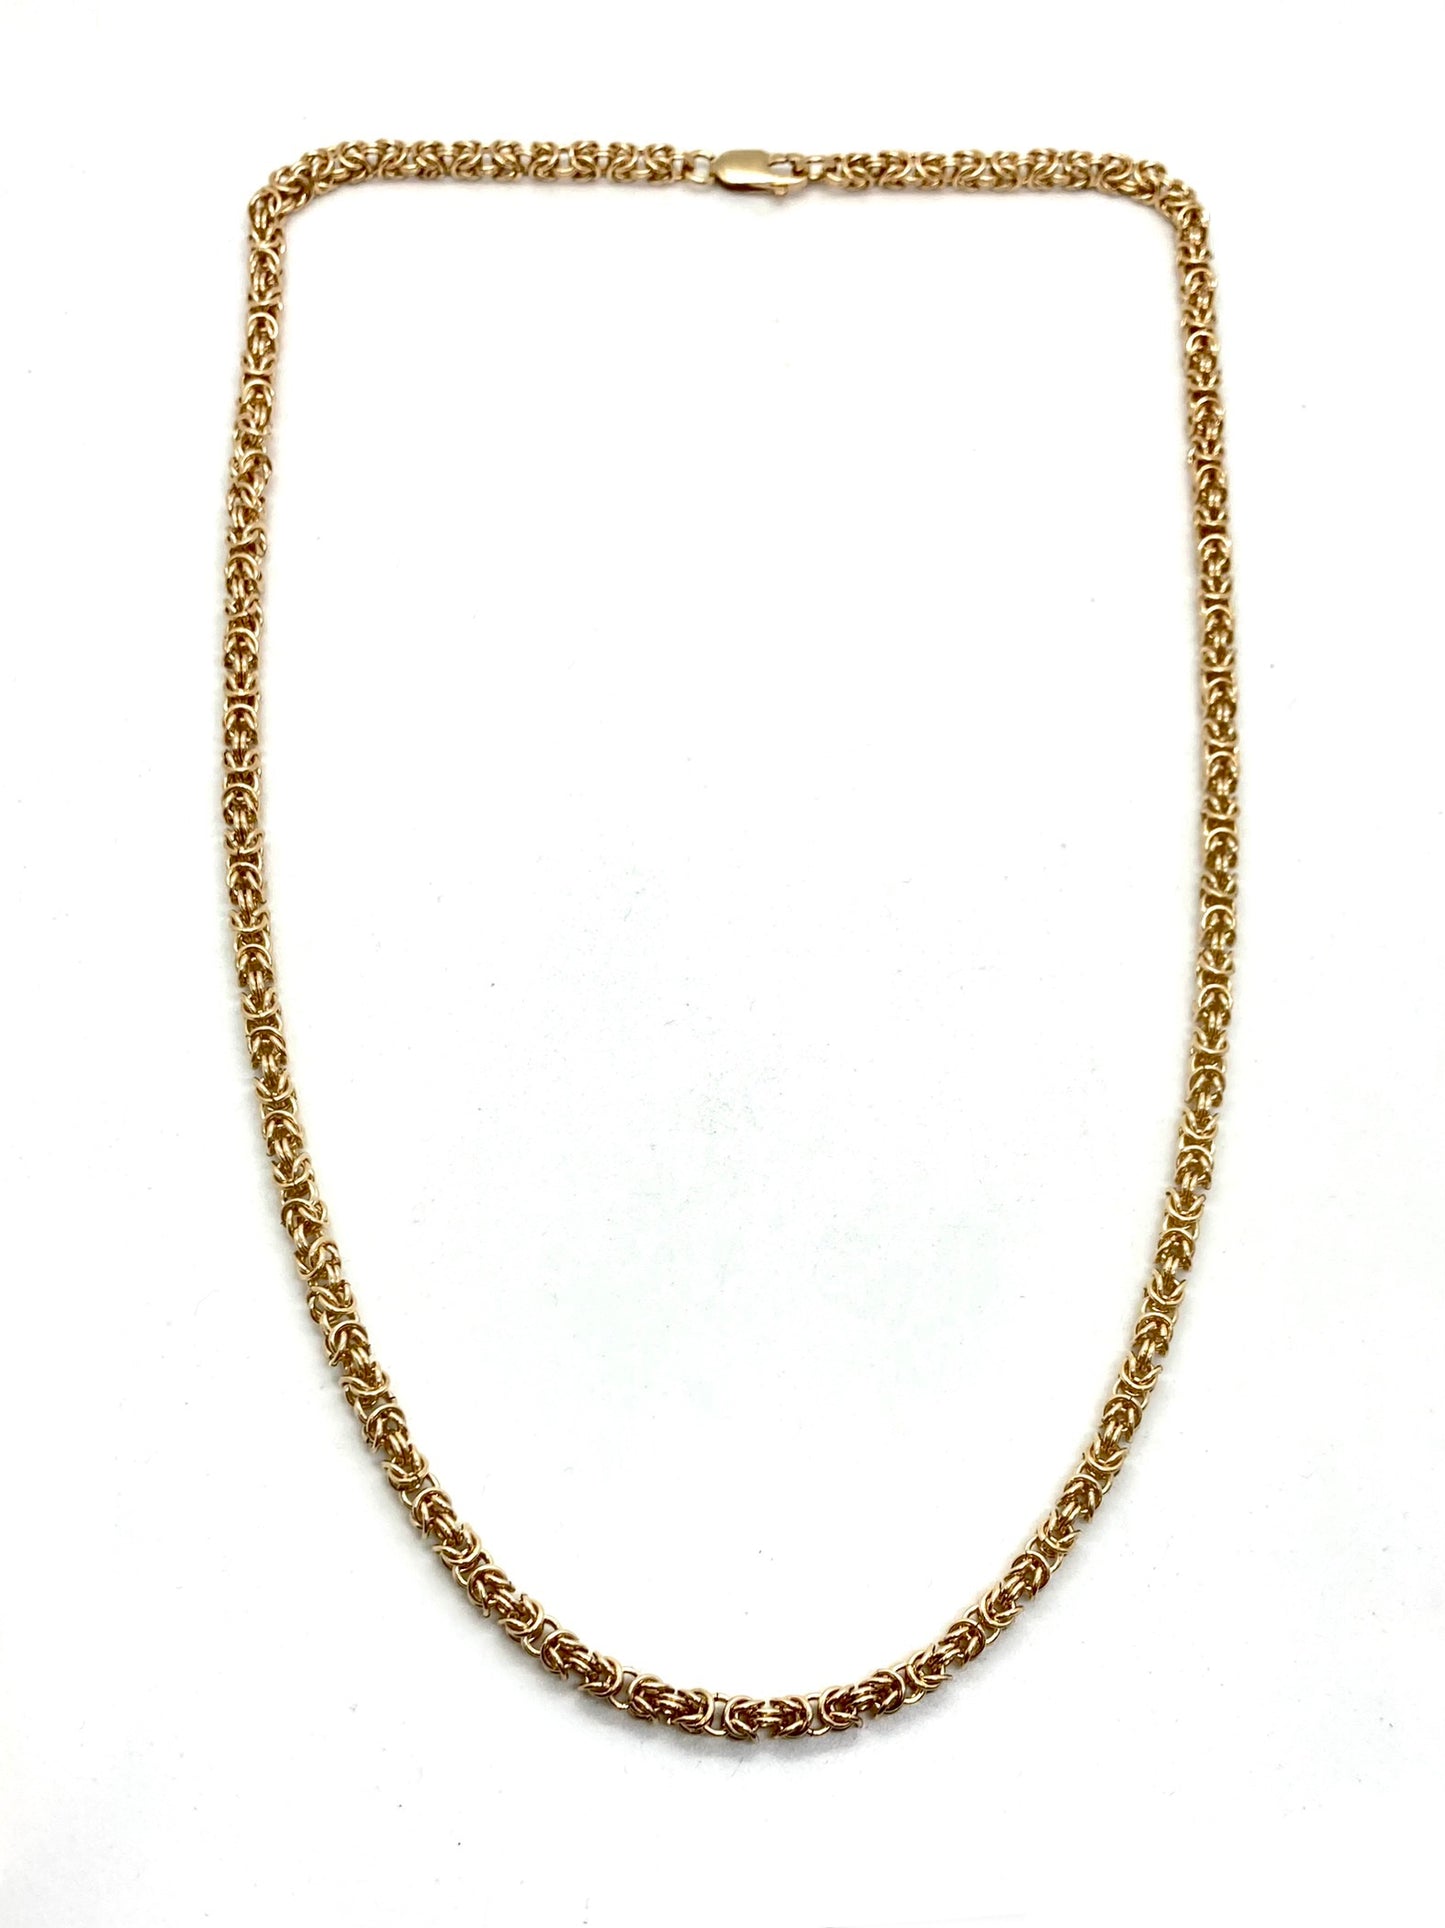 Delicate Byzantine Chainmaille Necklace in 14K Gold Fill